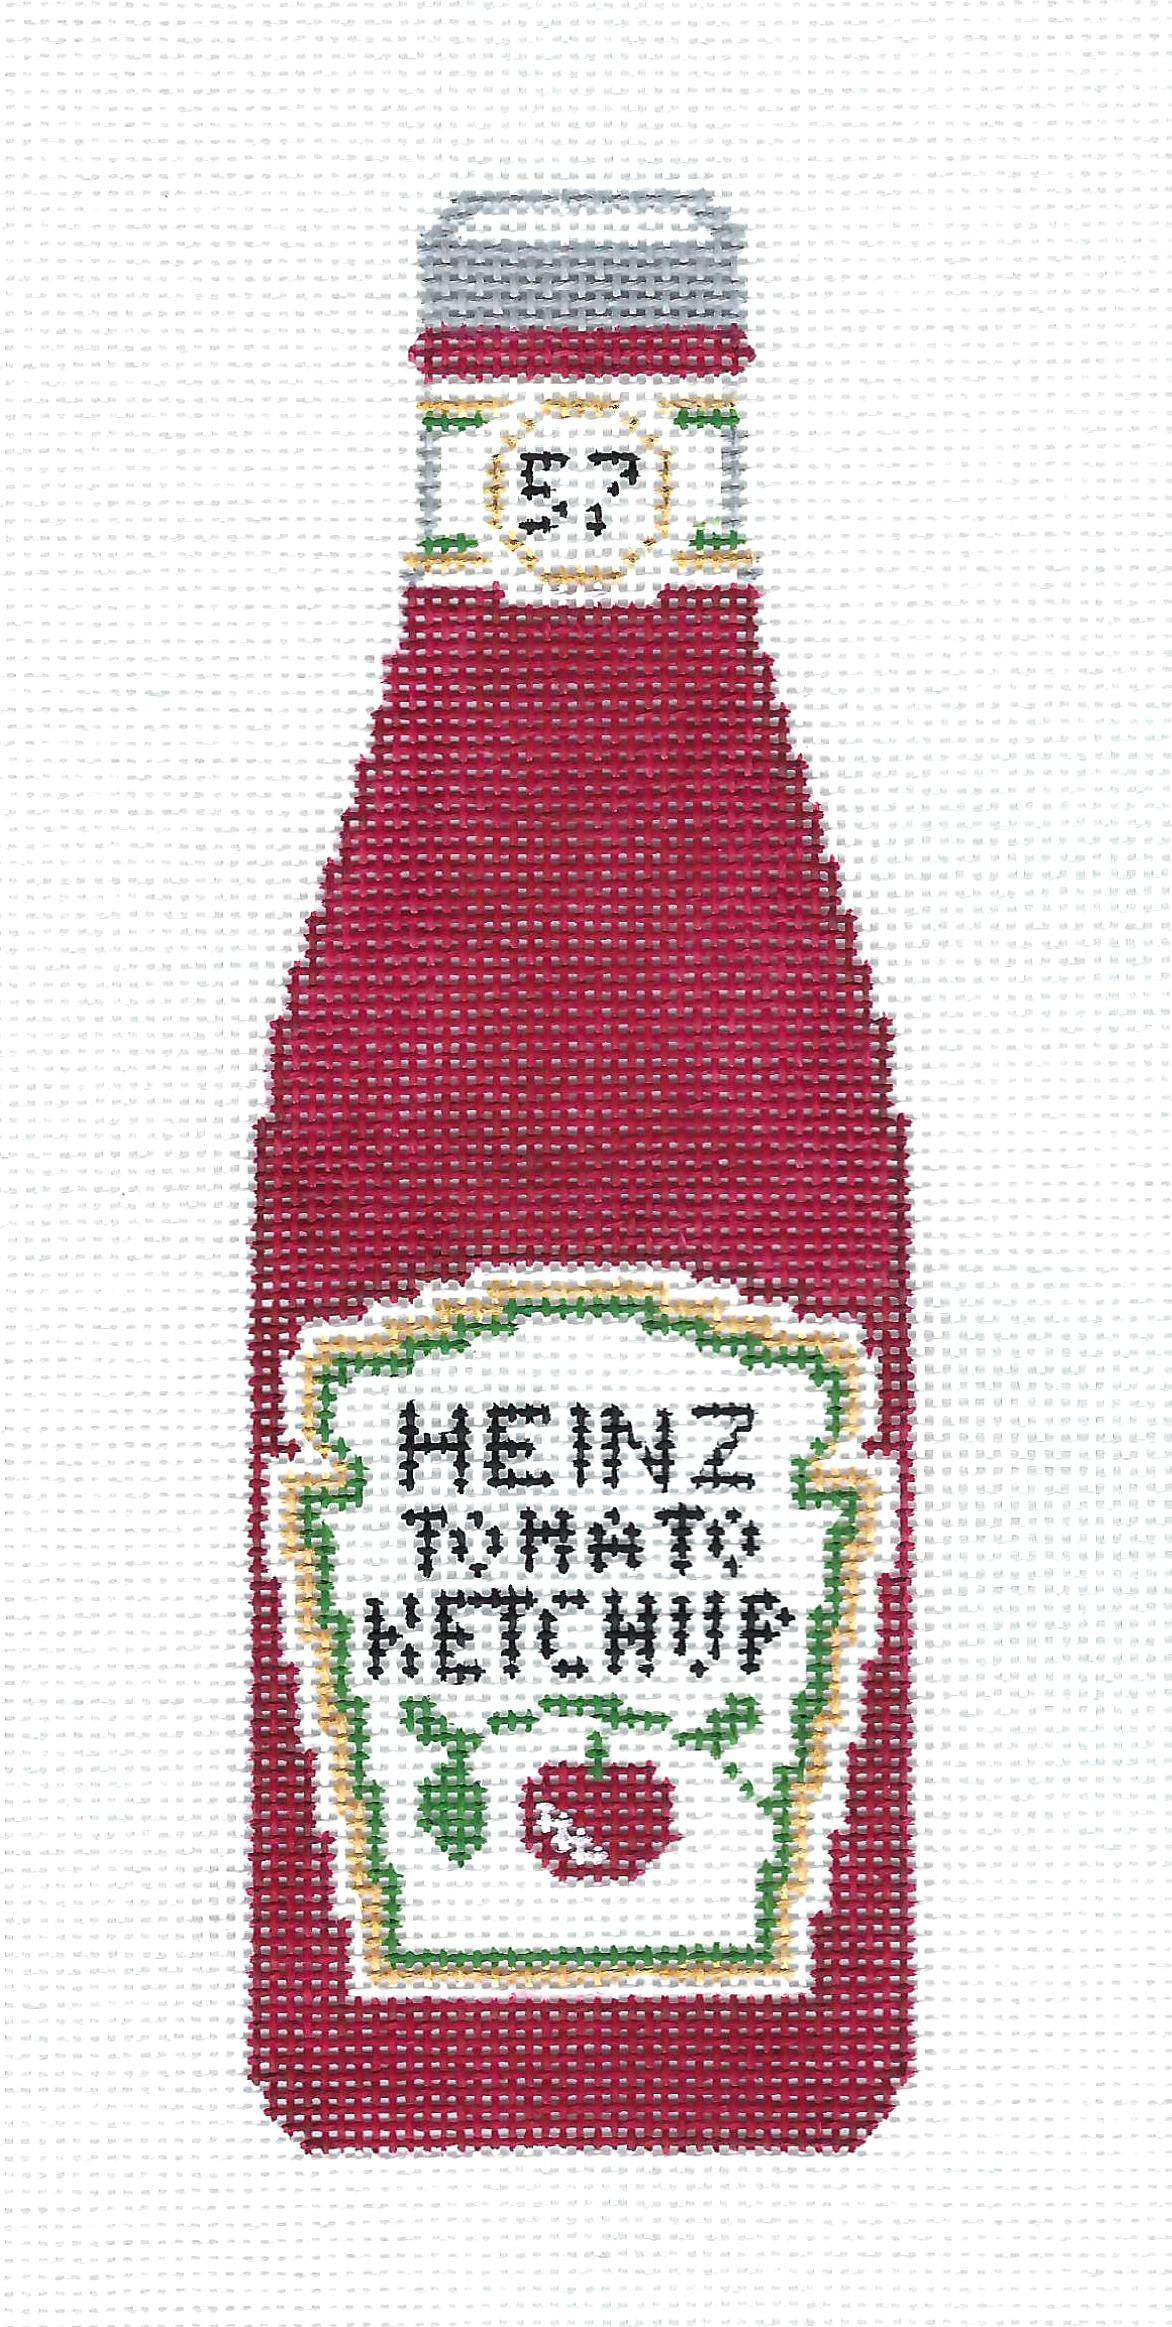 Heinz Tomato Ketchup Bottle in Red handpainted Needlepoint Canvas